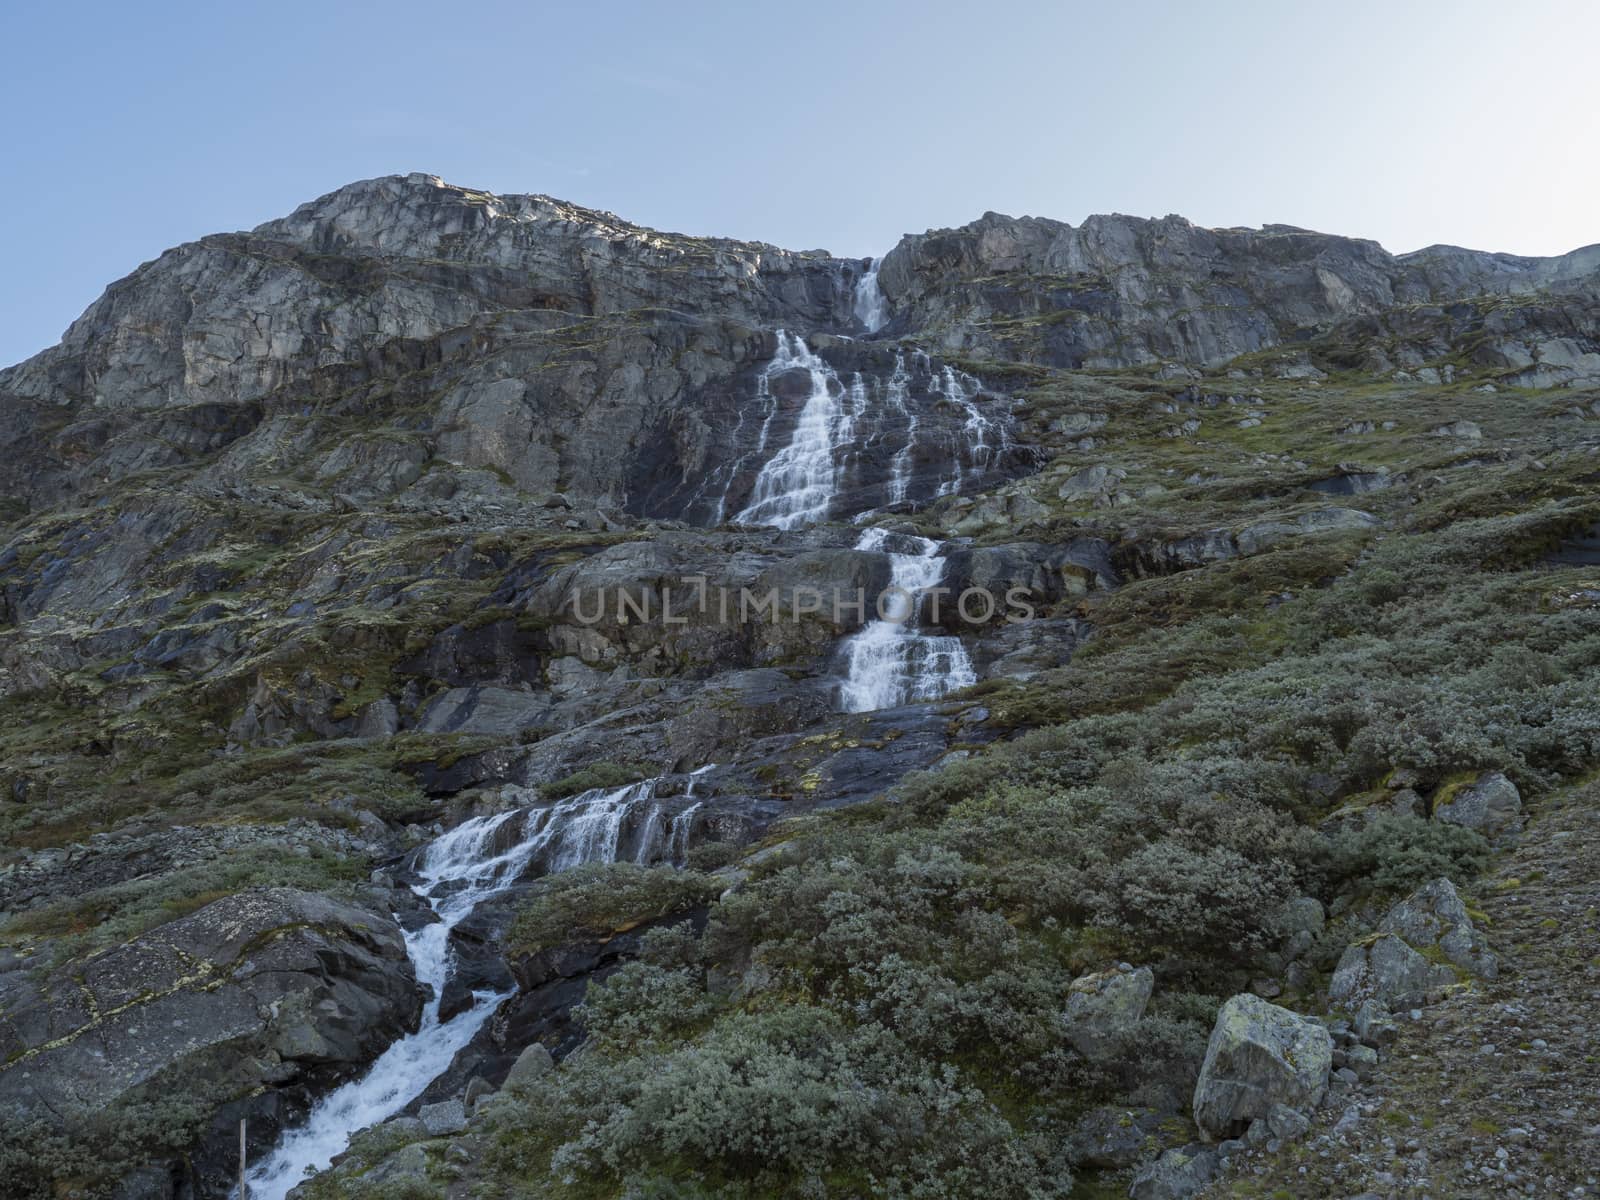 Waterfall in mountains. National tourist scenic route 55 Sognefjellet between Lom and Gaupne, Norway. Blue sky background